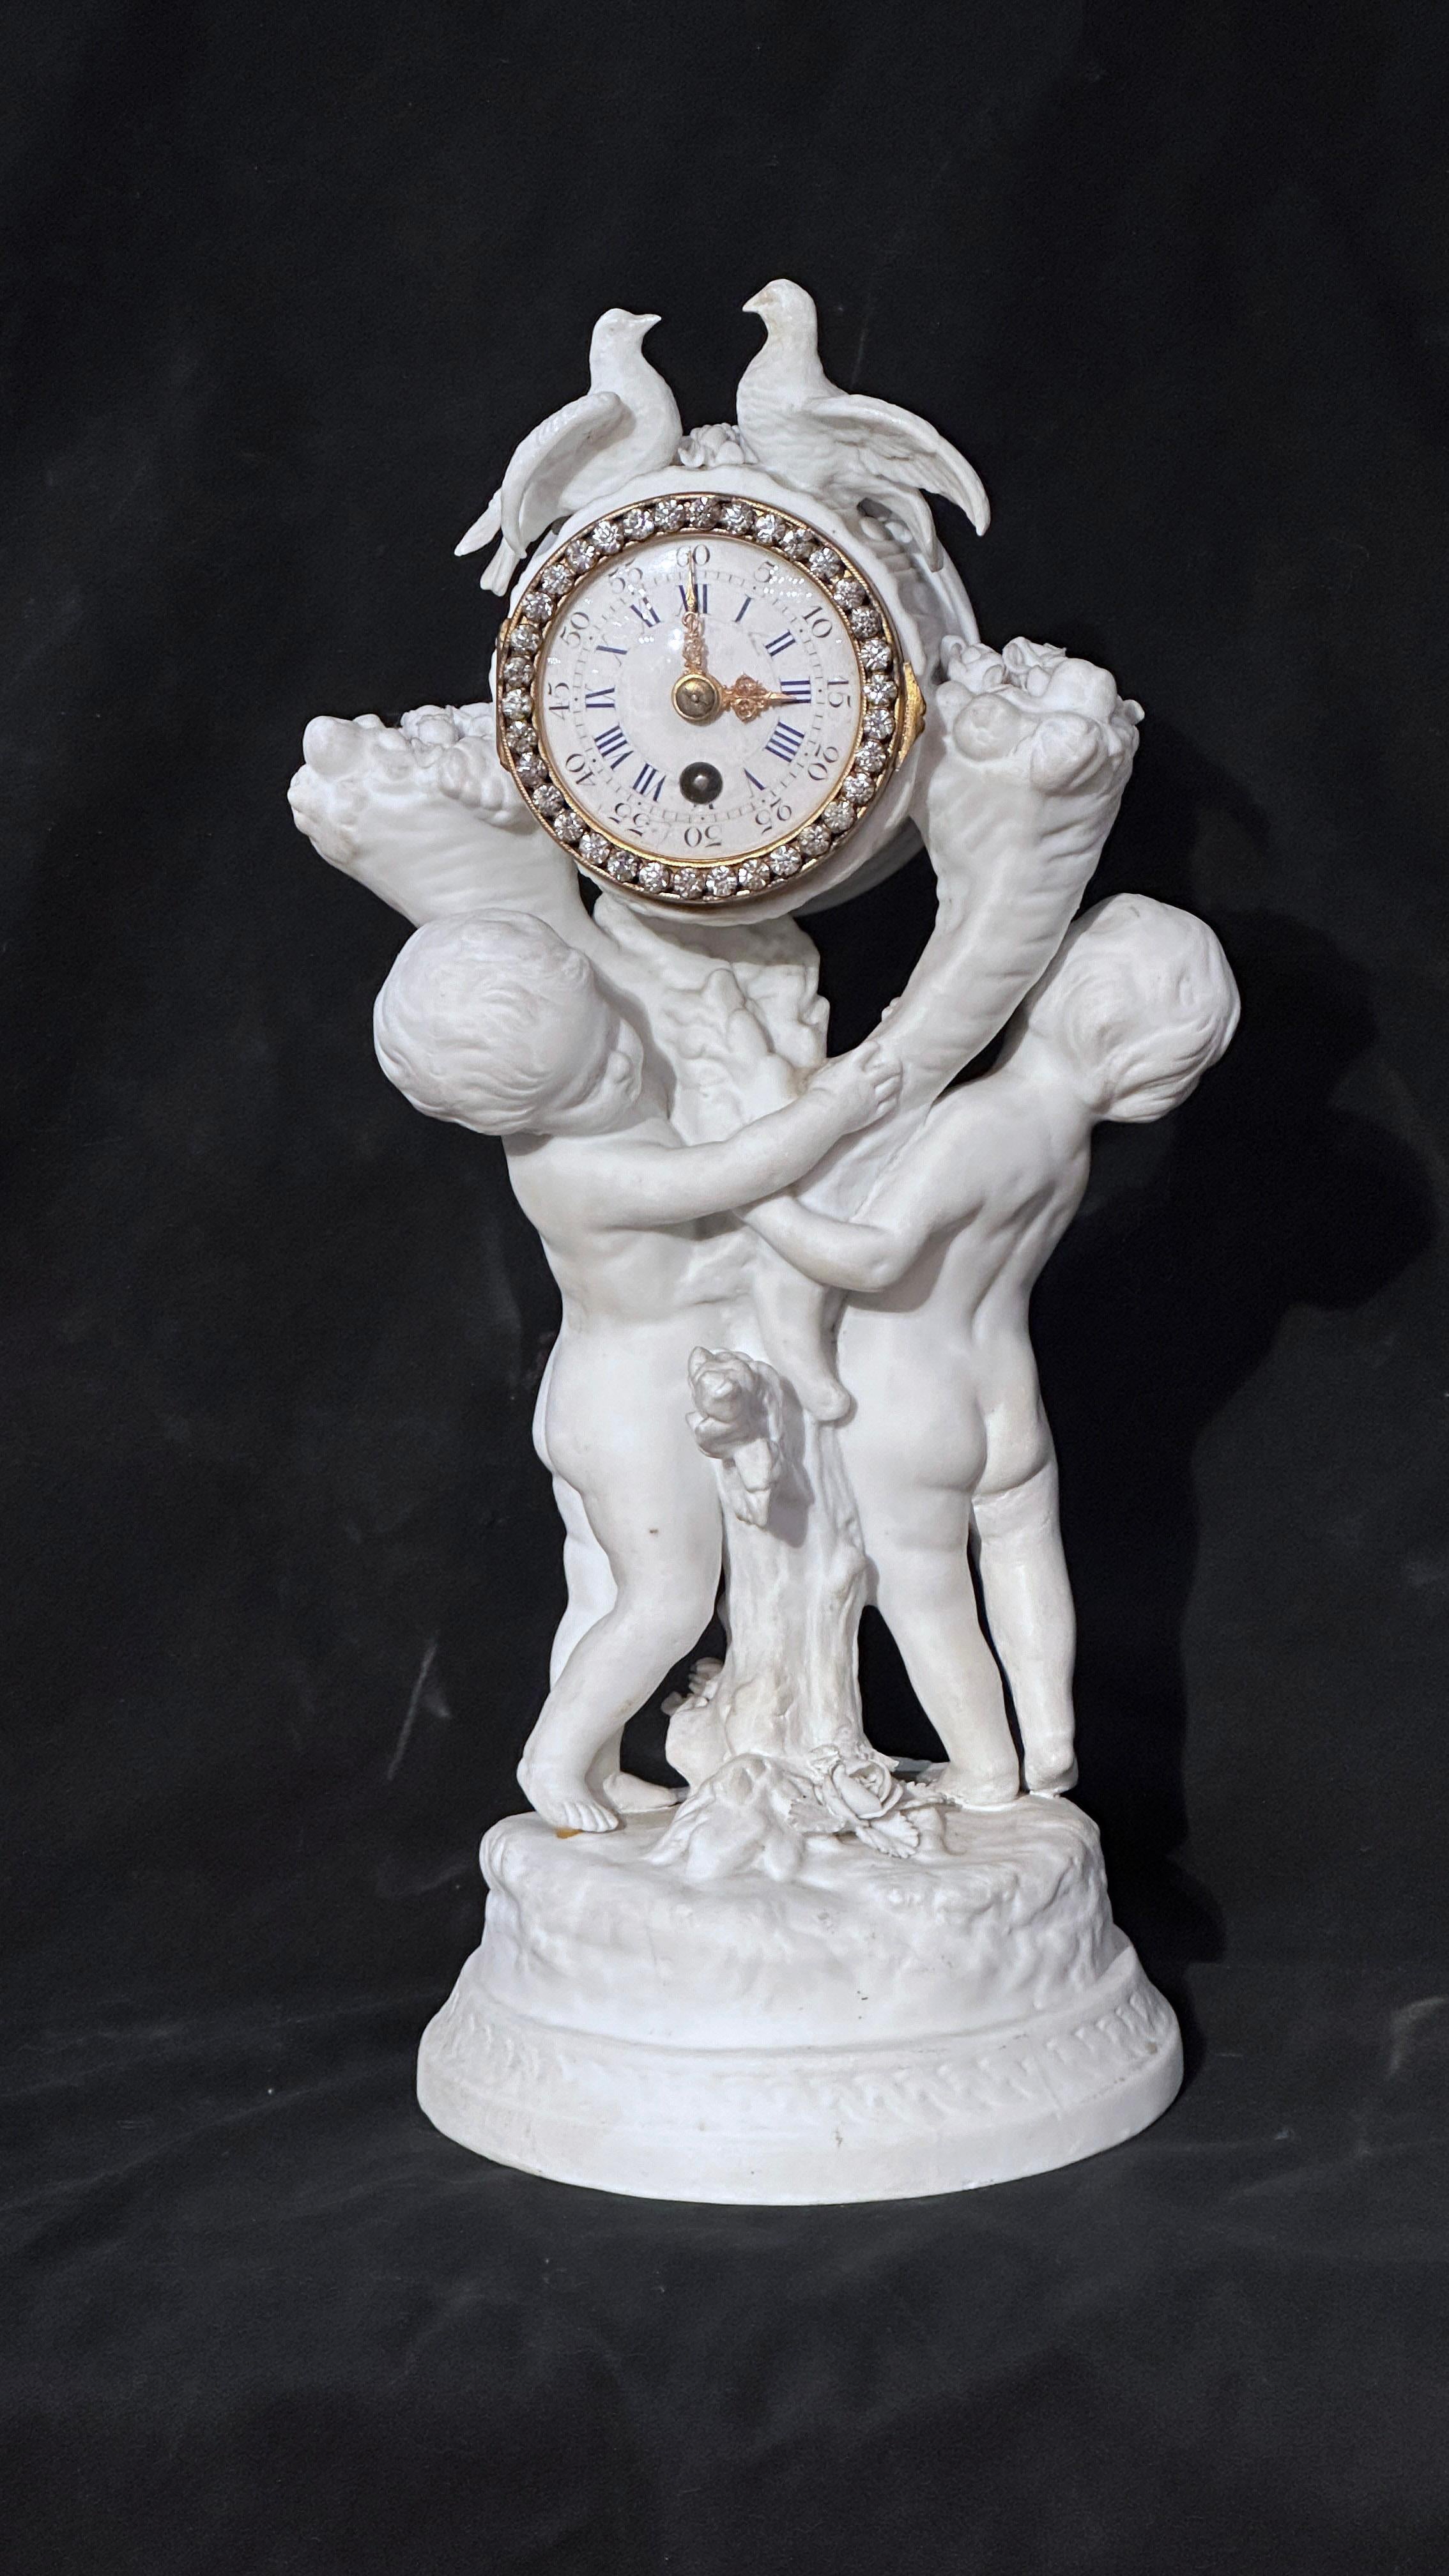 Elegant biscuit watch with an allegory of pure love. The spring-loaded watch features an enamelled dial with double Arabic and Roman numerals, and a crown set with zircons cut like diamonds. The dial is supported by two putti with cornucopias and